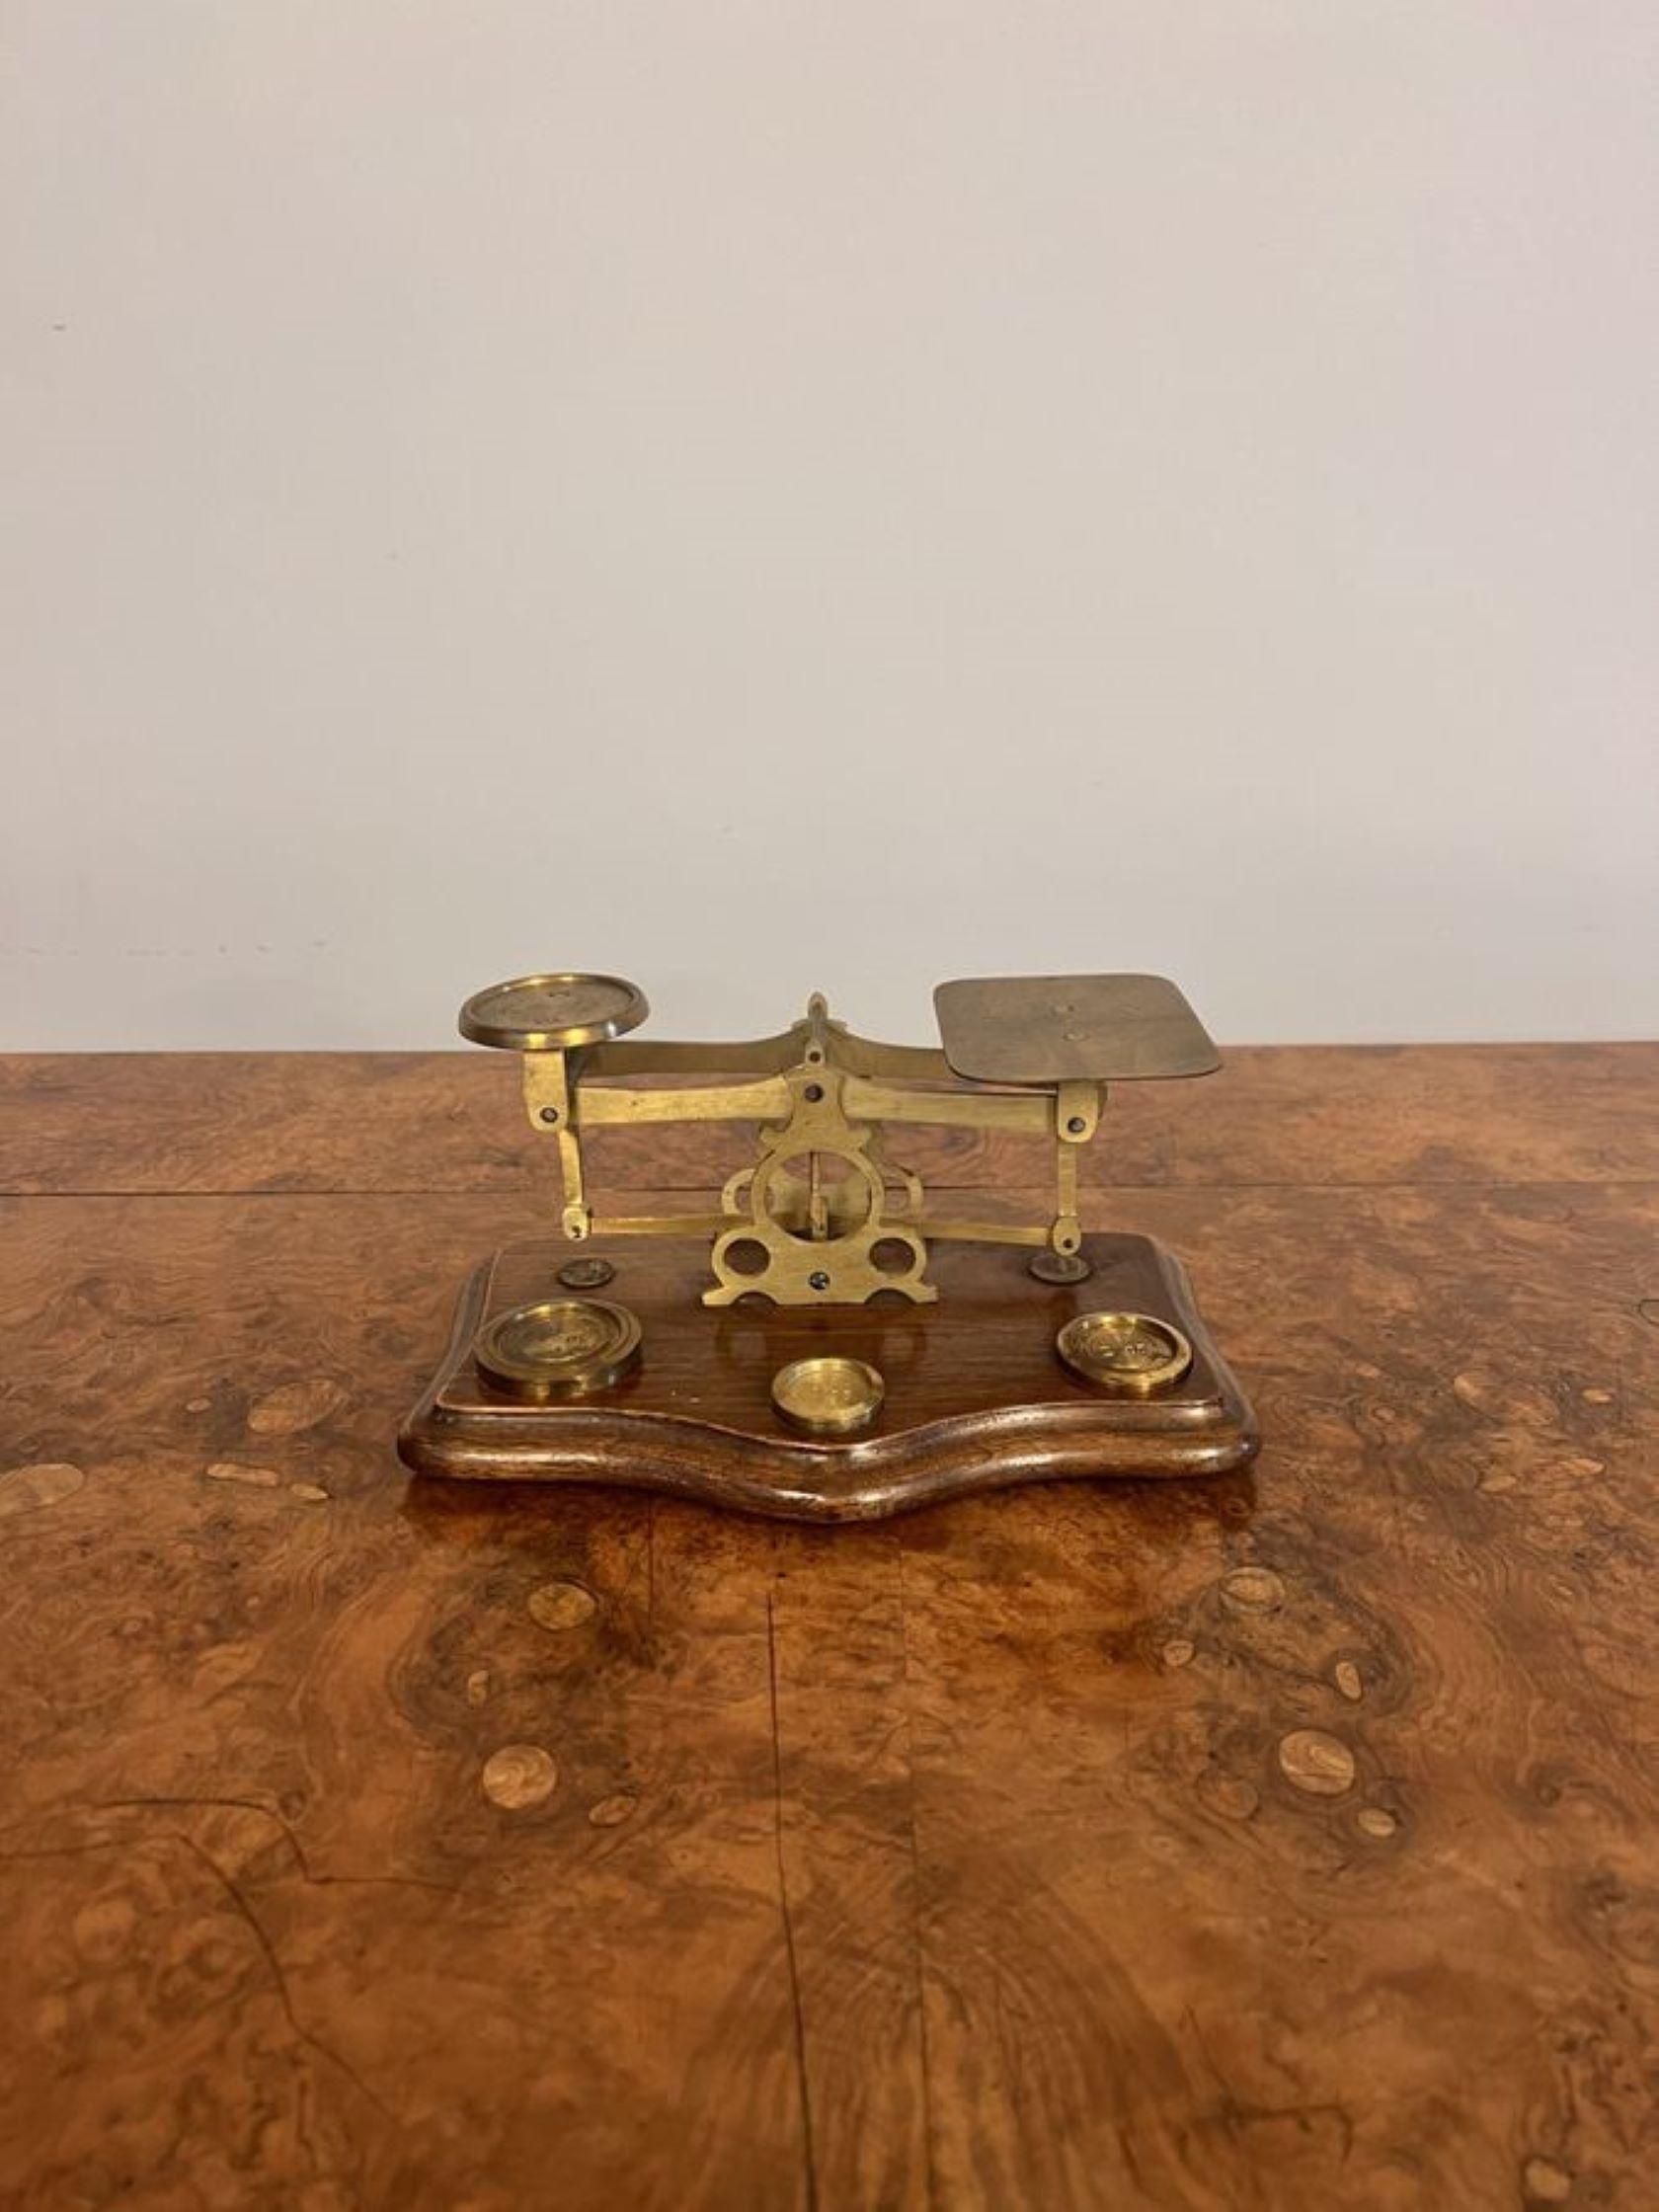 Wonderful antique Edwardian postal scales & weights, having a lovely pair of antique Victorian brass postal scales with brass weights mounted on a wooden shaped base.

D. 1910 